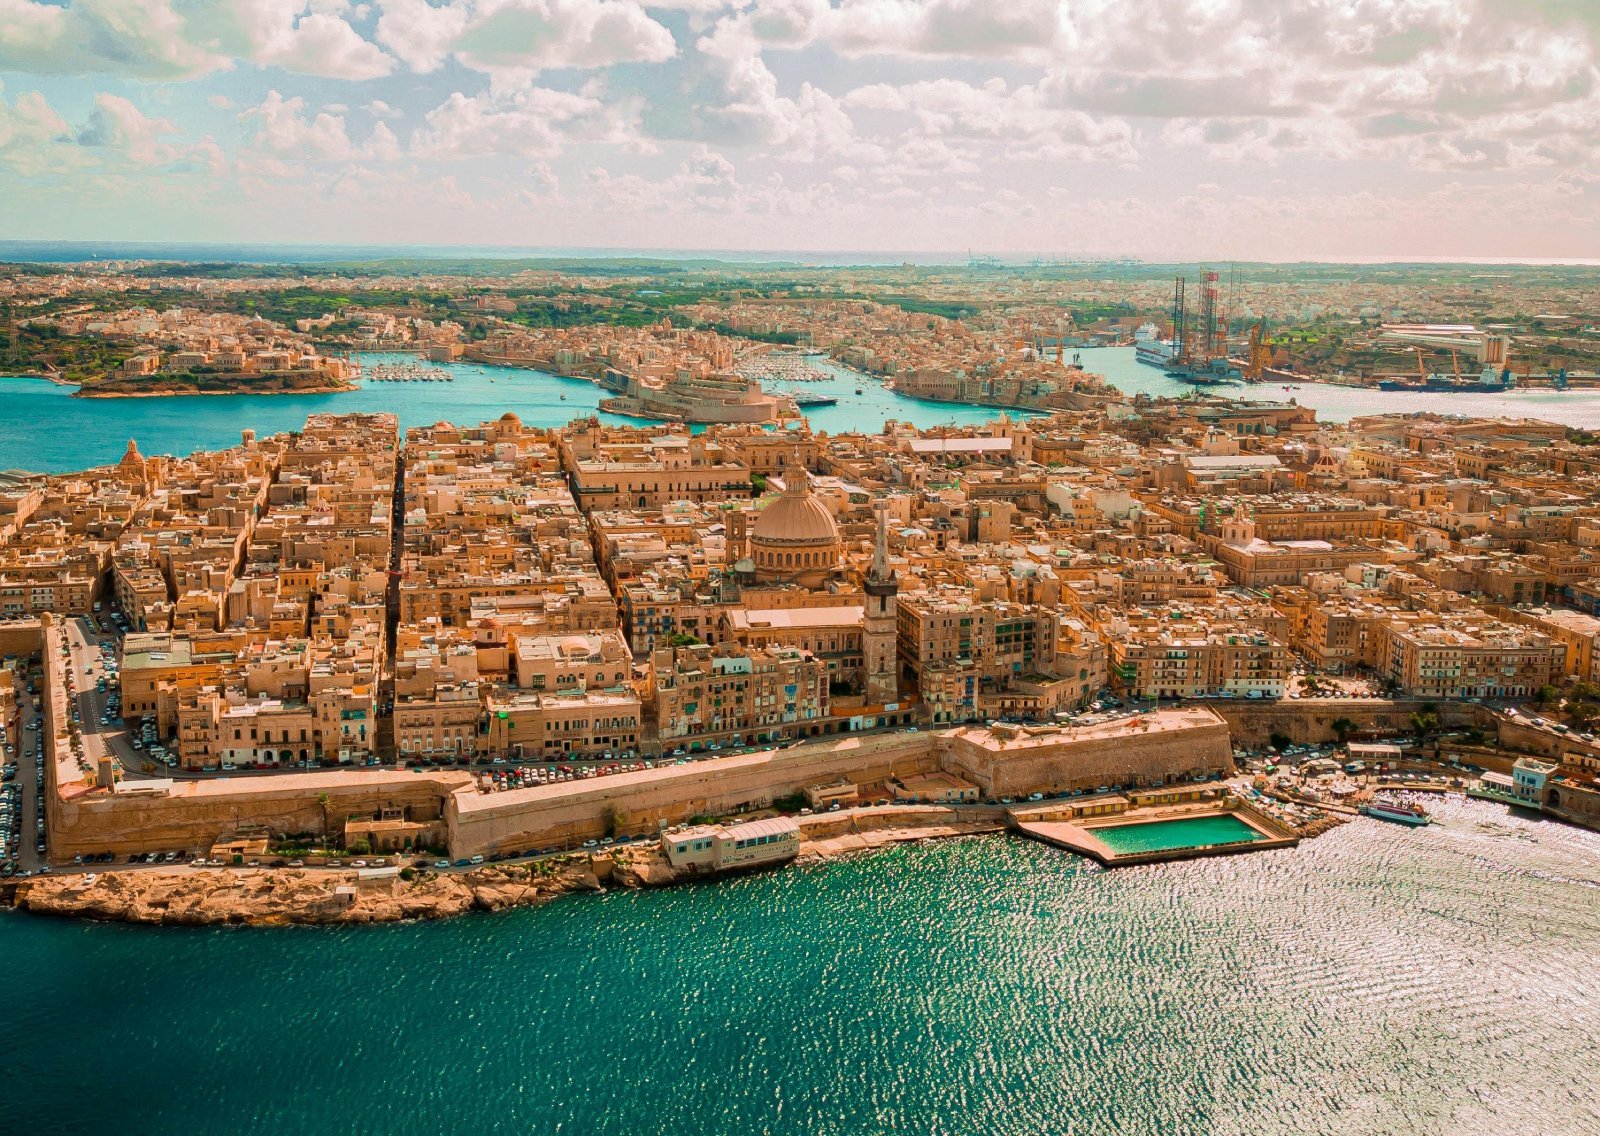 <p class="wp-caption-text">Image Credit: Pexels / Som Thapa Magar</p>  <p><span>The island nation of Malta, with its ancient megalithic temples and mysterious cart ruts, has been linked to Atlantis due to its rich prehistoric culture and strategic location in the Mediterranean. The temples, some of the oldest free-standing structures in the world, suggest a highly advanced society lived on the island, while the enigmatic cart ruts carved into the limestone hint at an extensive transportation network.</span></p>